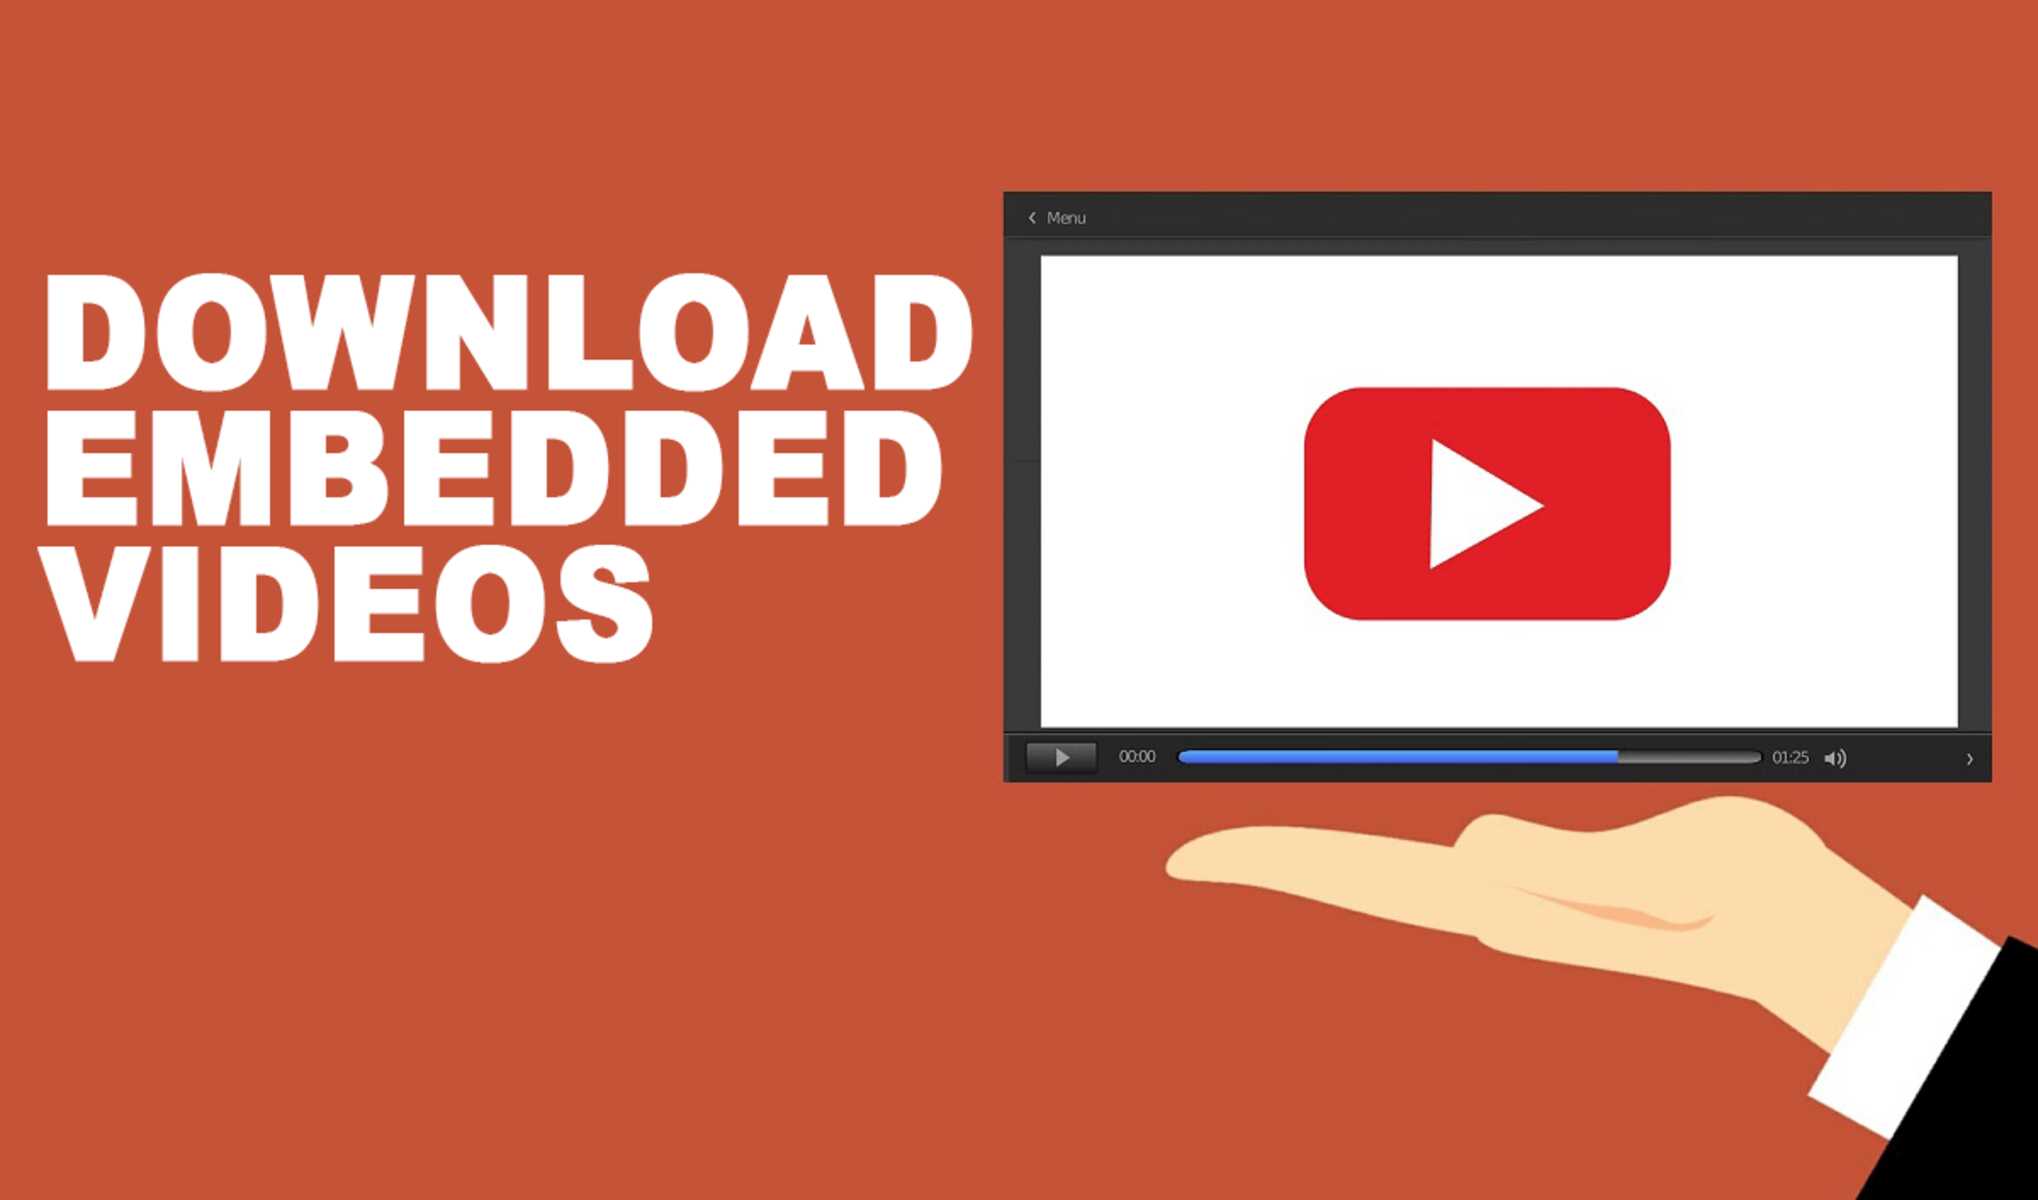 How To Download An Embedded Video In Chrome